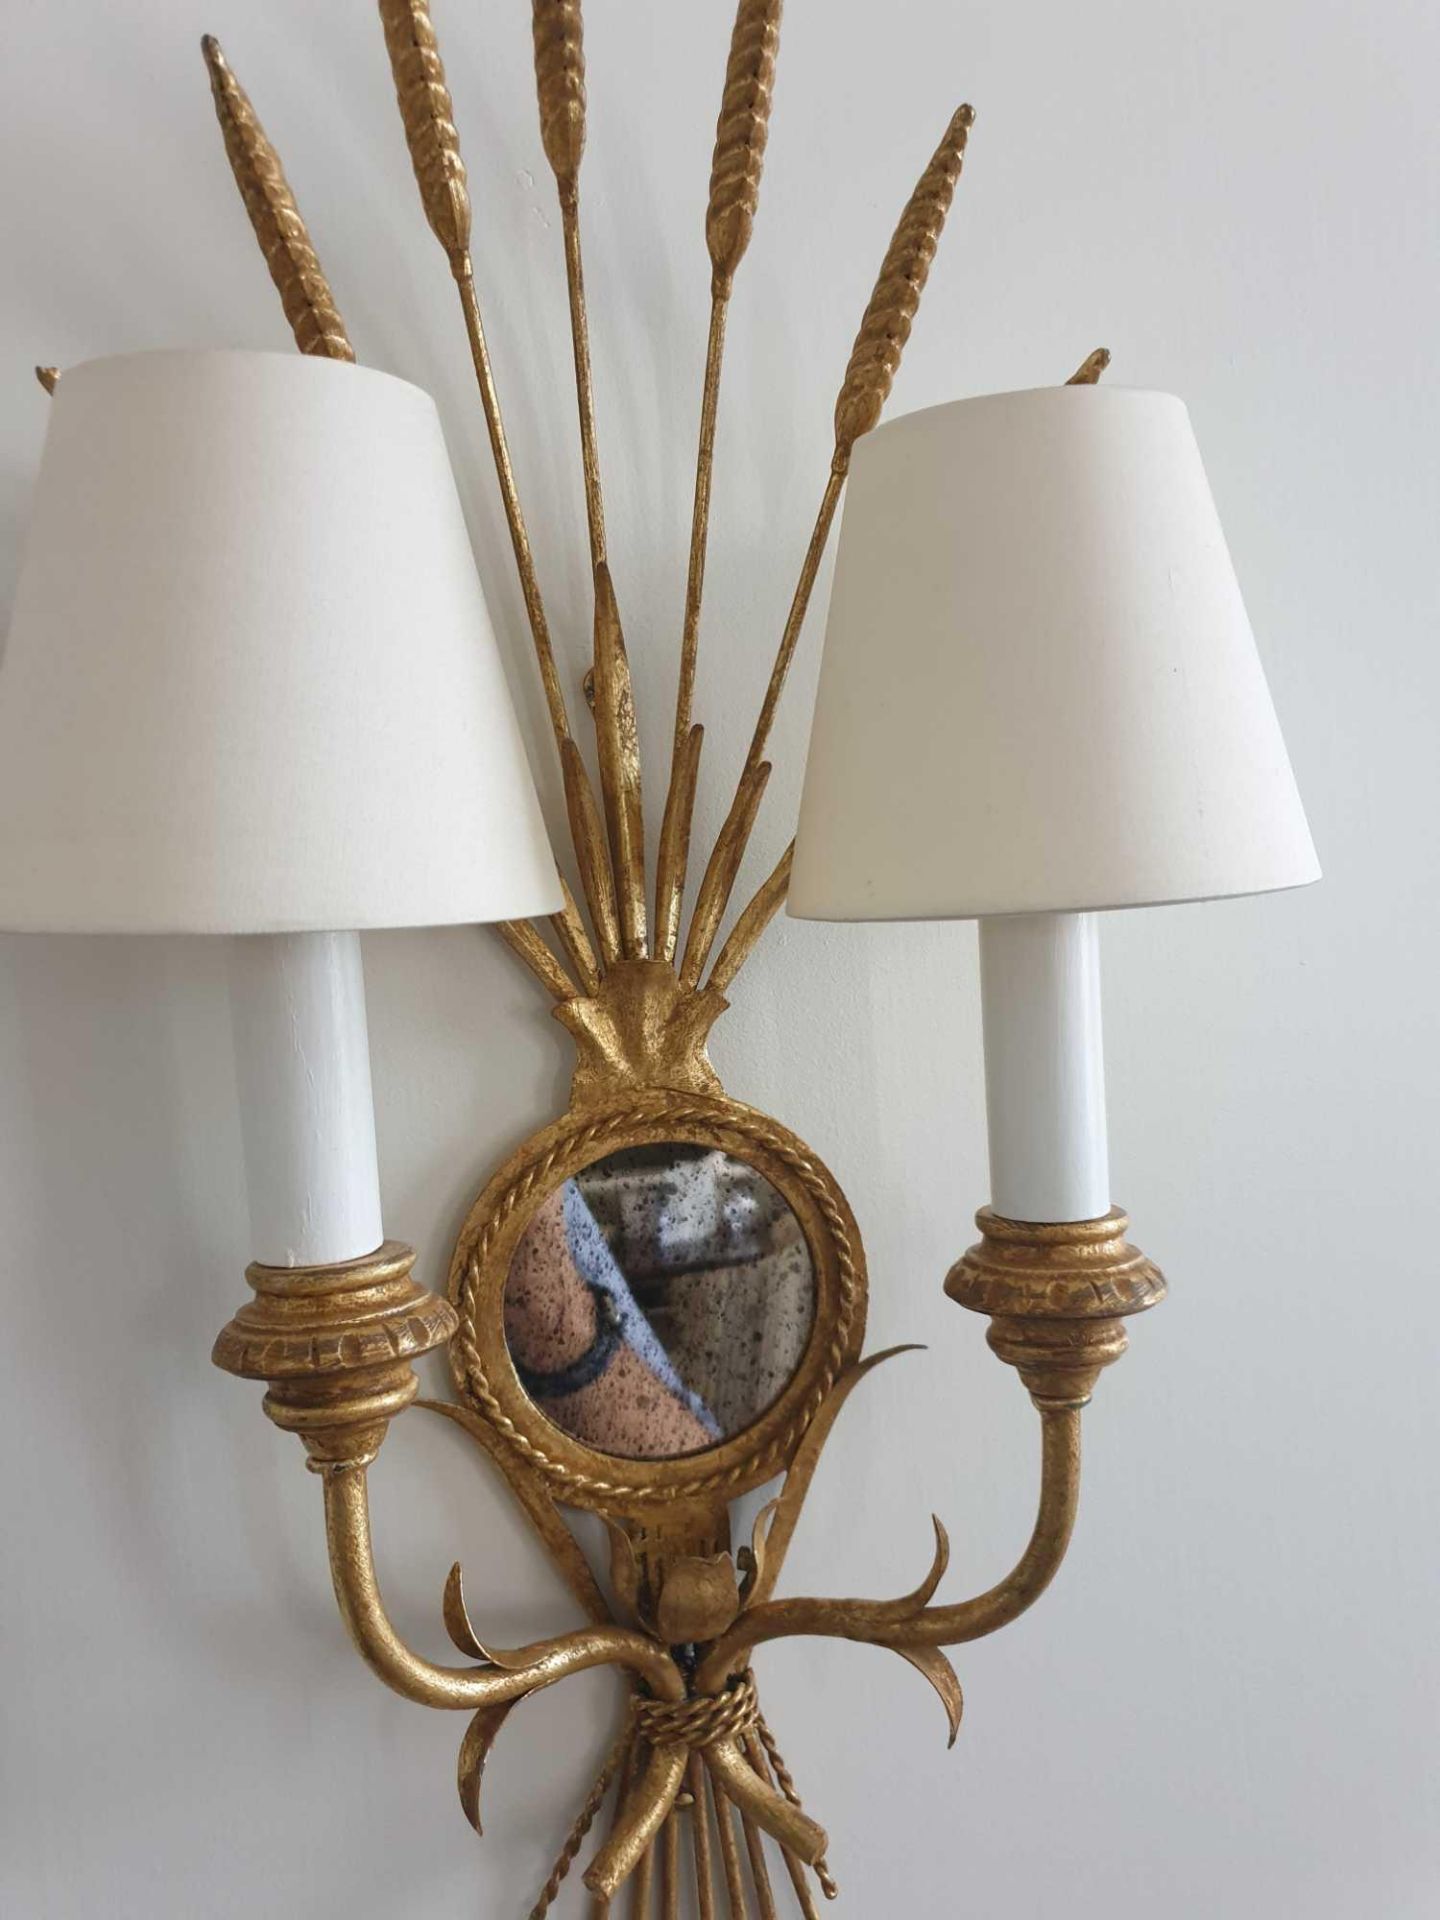 A Pair Of Wall Appliques Twin Arm In A Elegant Wheatsheaf Motif And A Small Decorative Mirror - Image 2 of 2